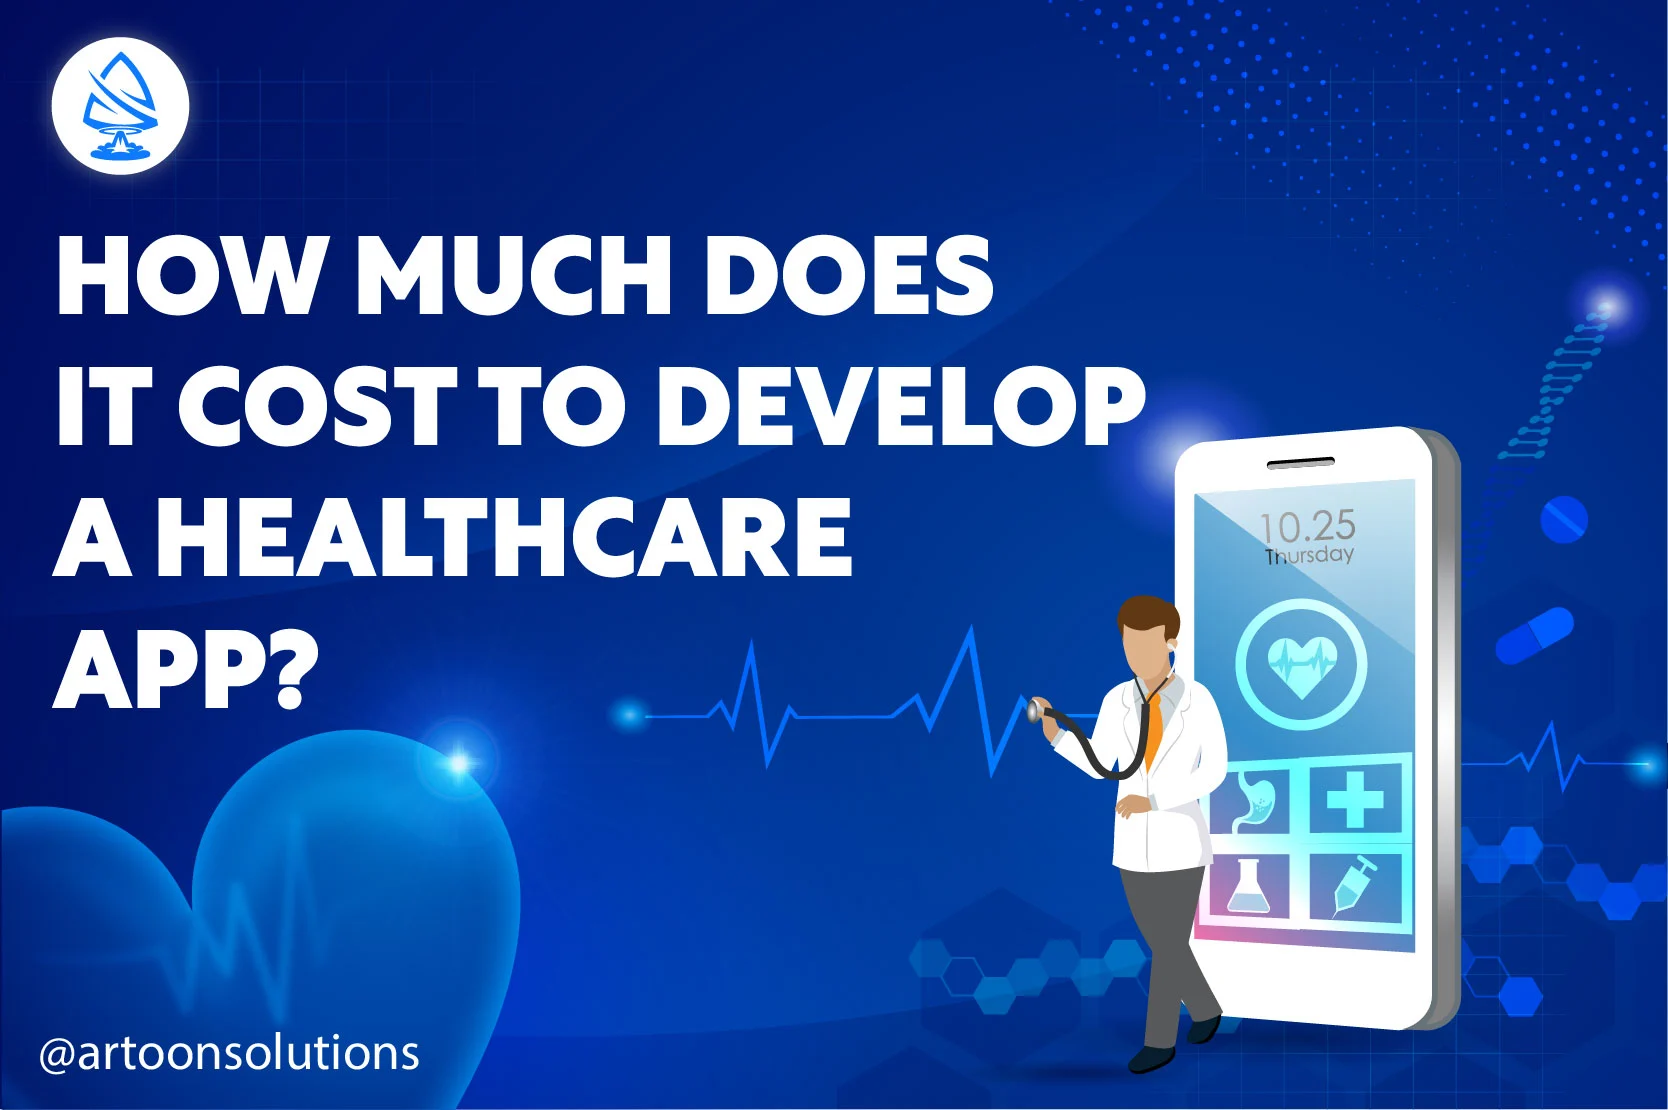 How Much Does It Cost to Develop an Healthcare App?